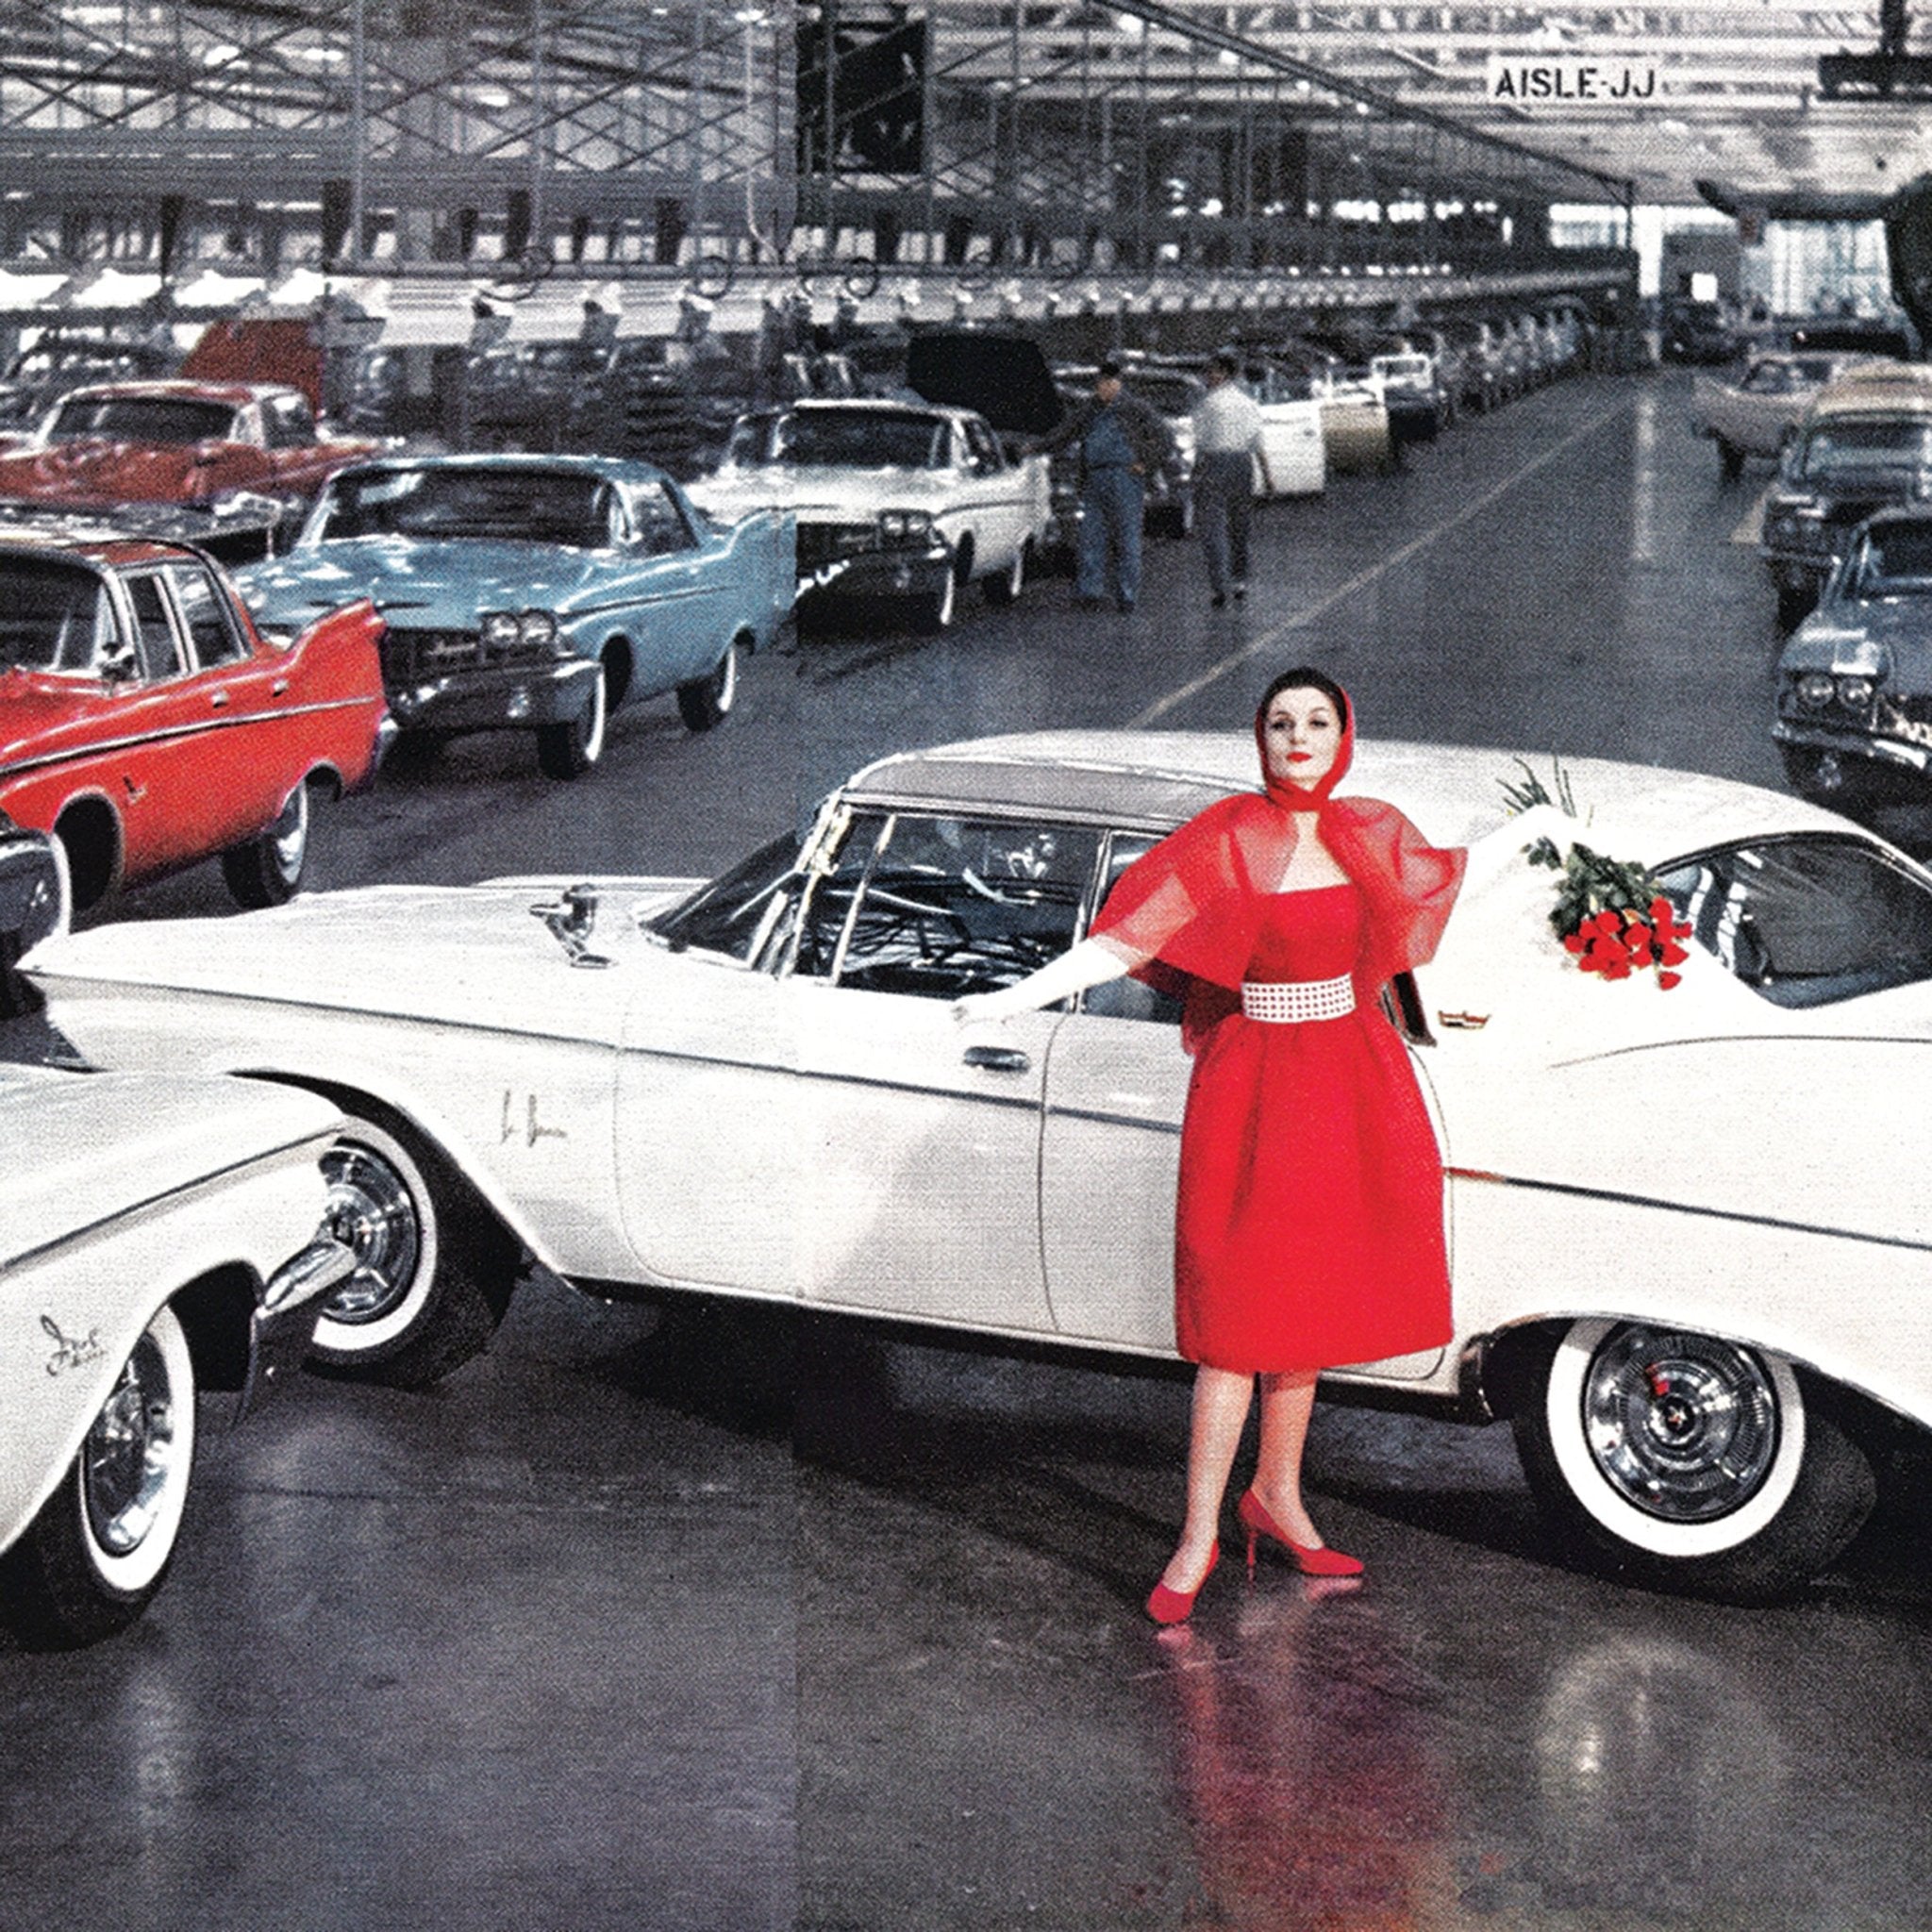 Glamour Road: Color, Fashion, Style, and the Midcentury Automobile